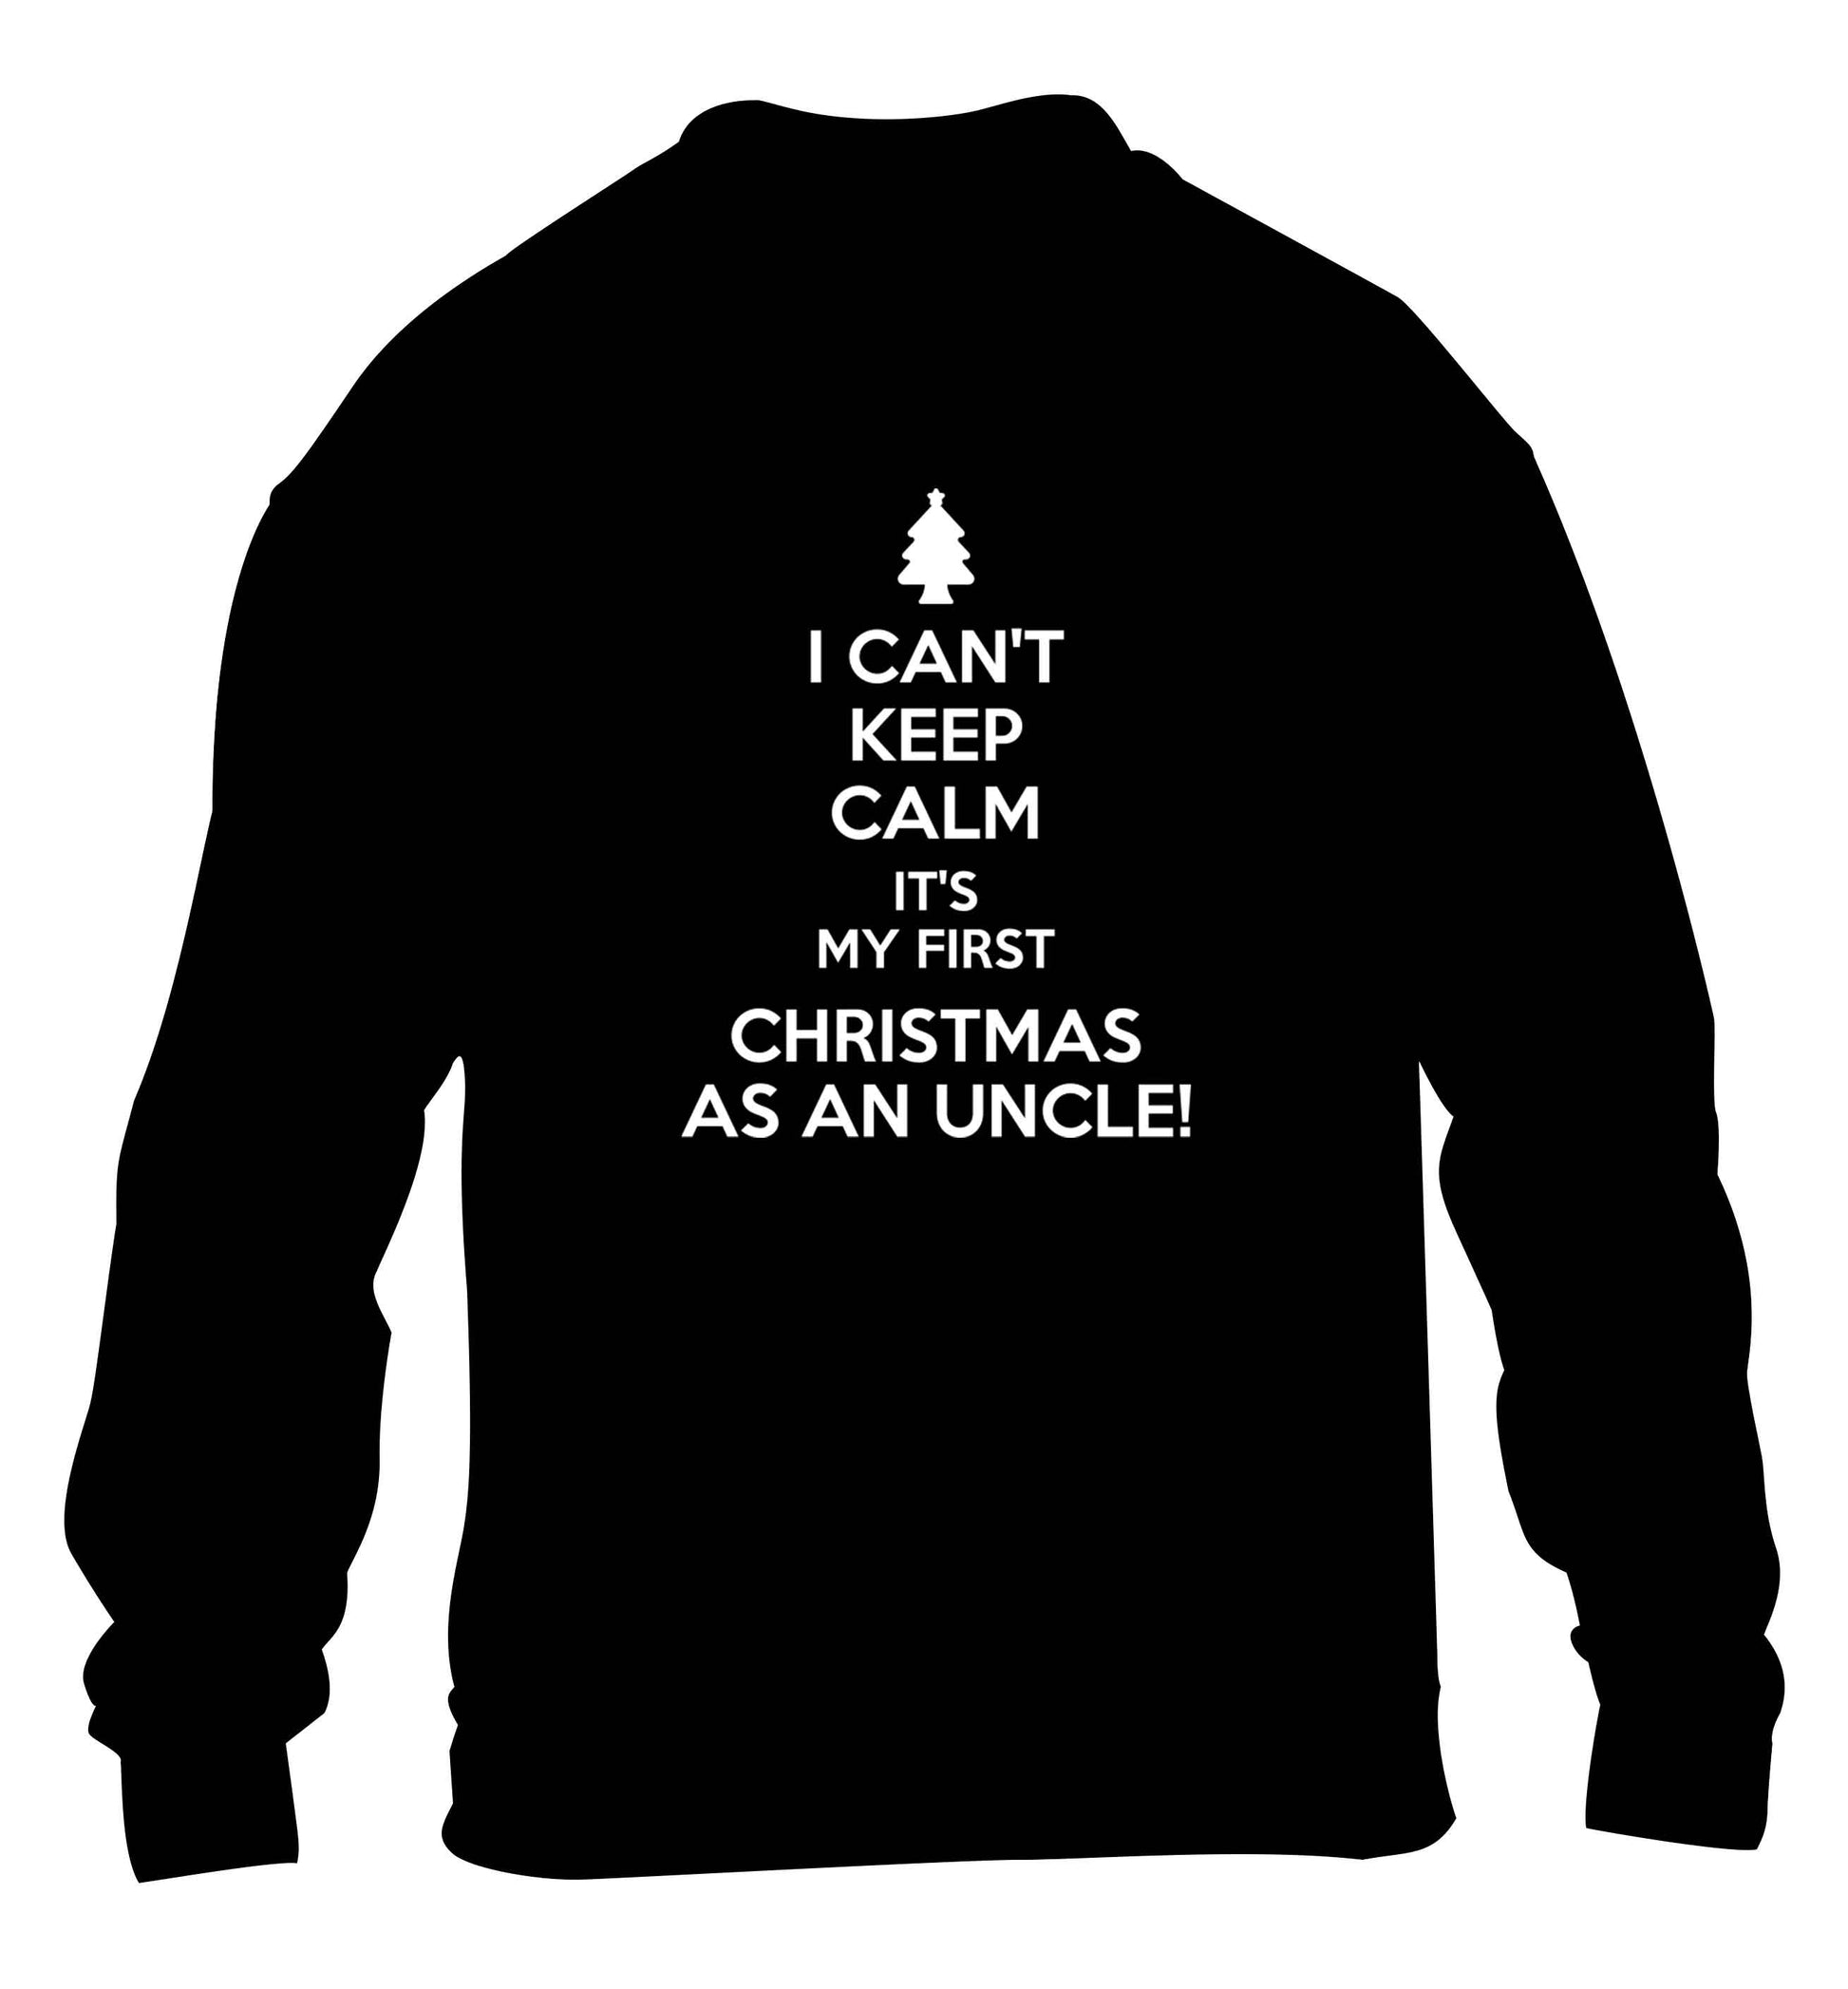 I can't keep calm it's my first Christmas as an uncle! children's black sweater 12-13 Years